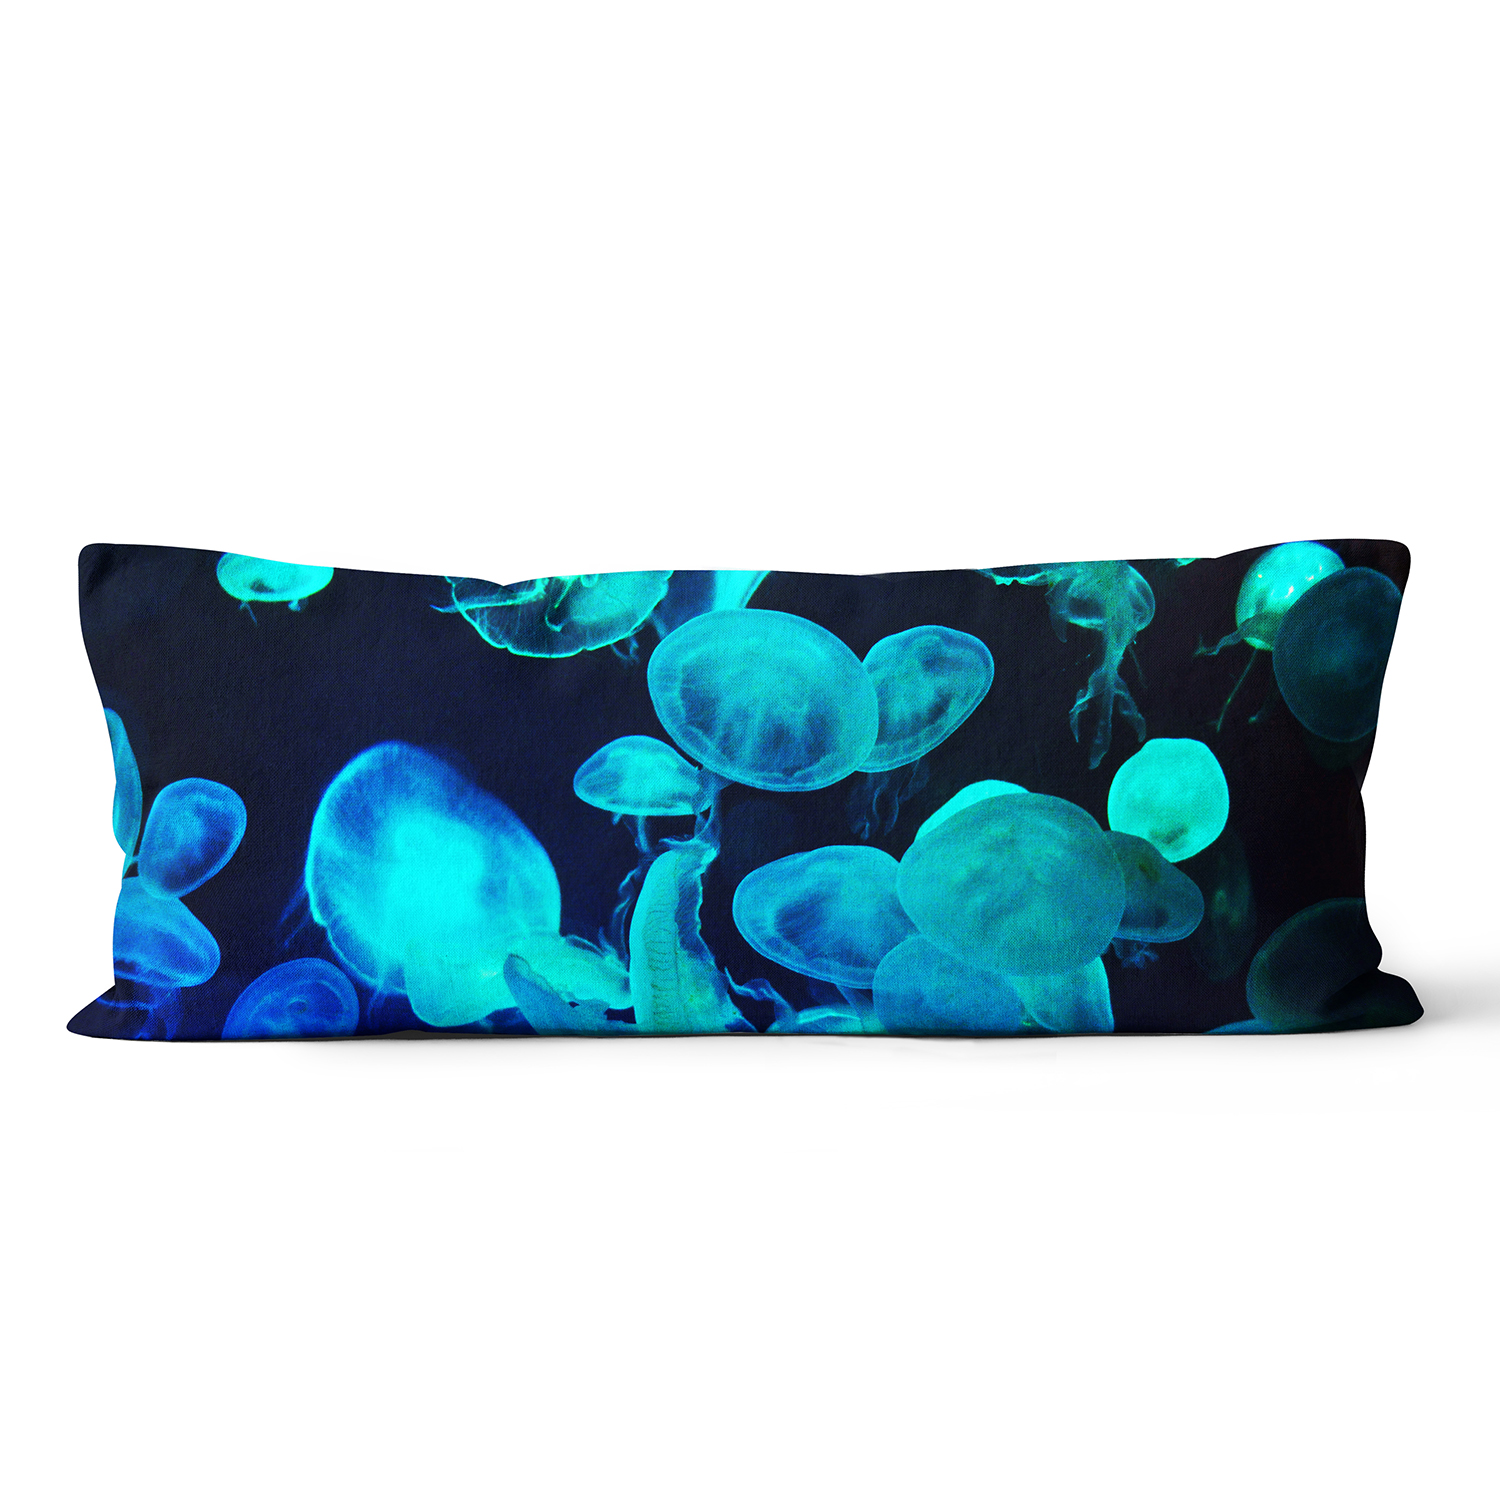 Blue Moon Jellyfish Body Pillow Beach Surf Decor By Nature City Co